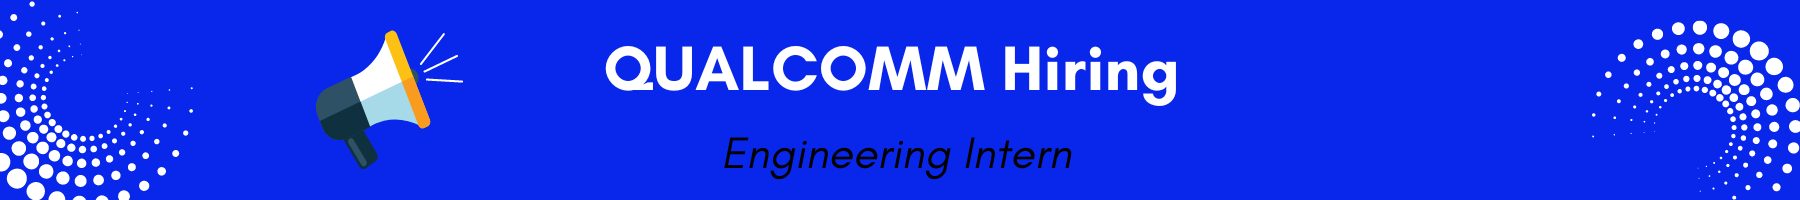 QUALCOMM Banner  (1).png